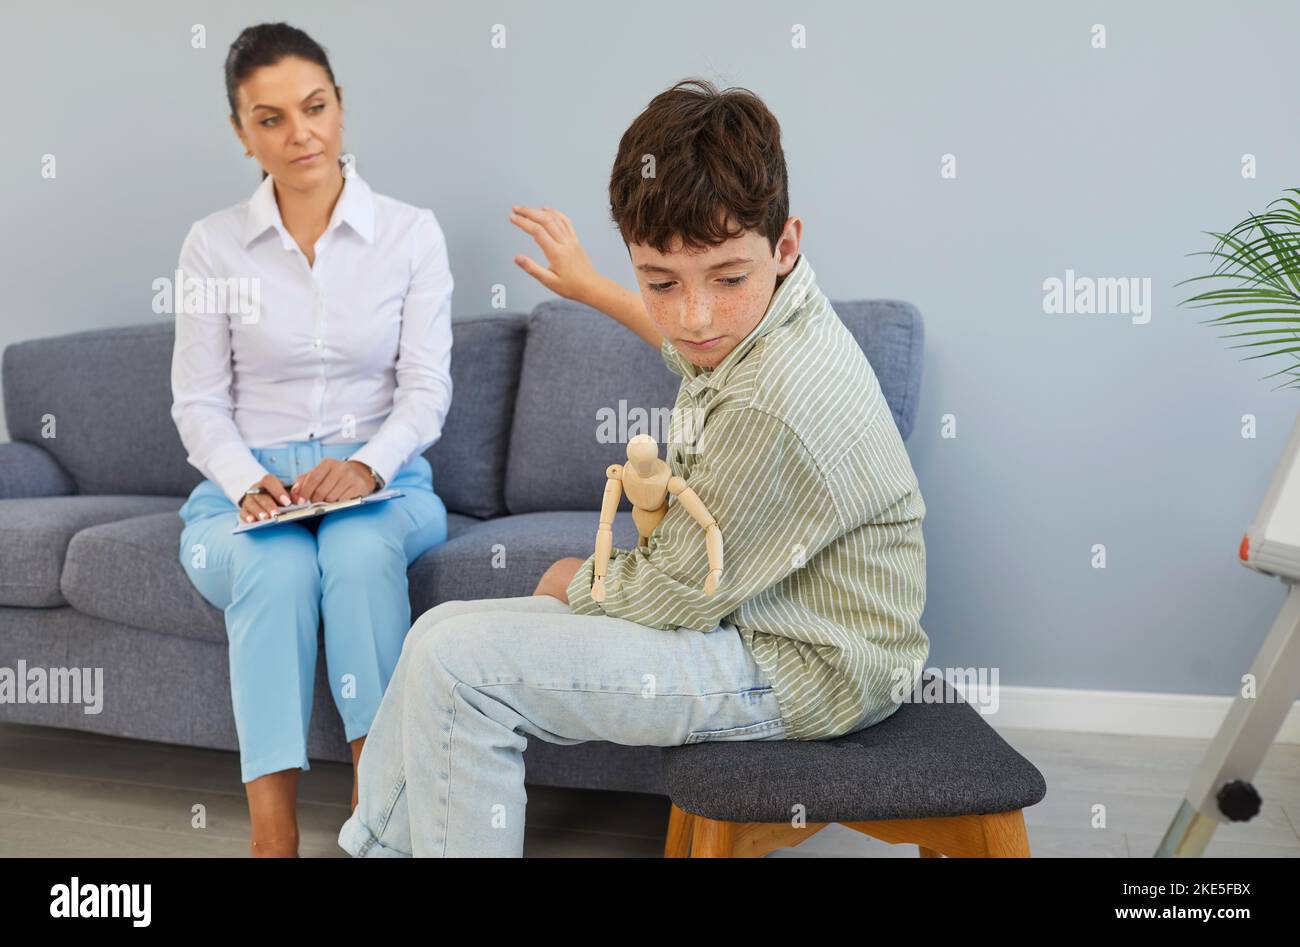 Upset preteen boy turns away and refuses to communicate in therapy session with psychologist. Stock Photo